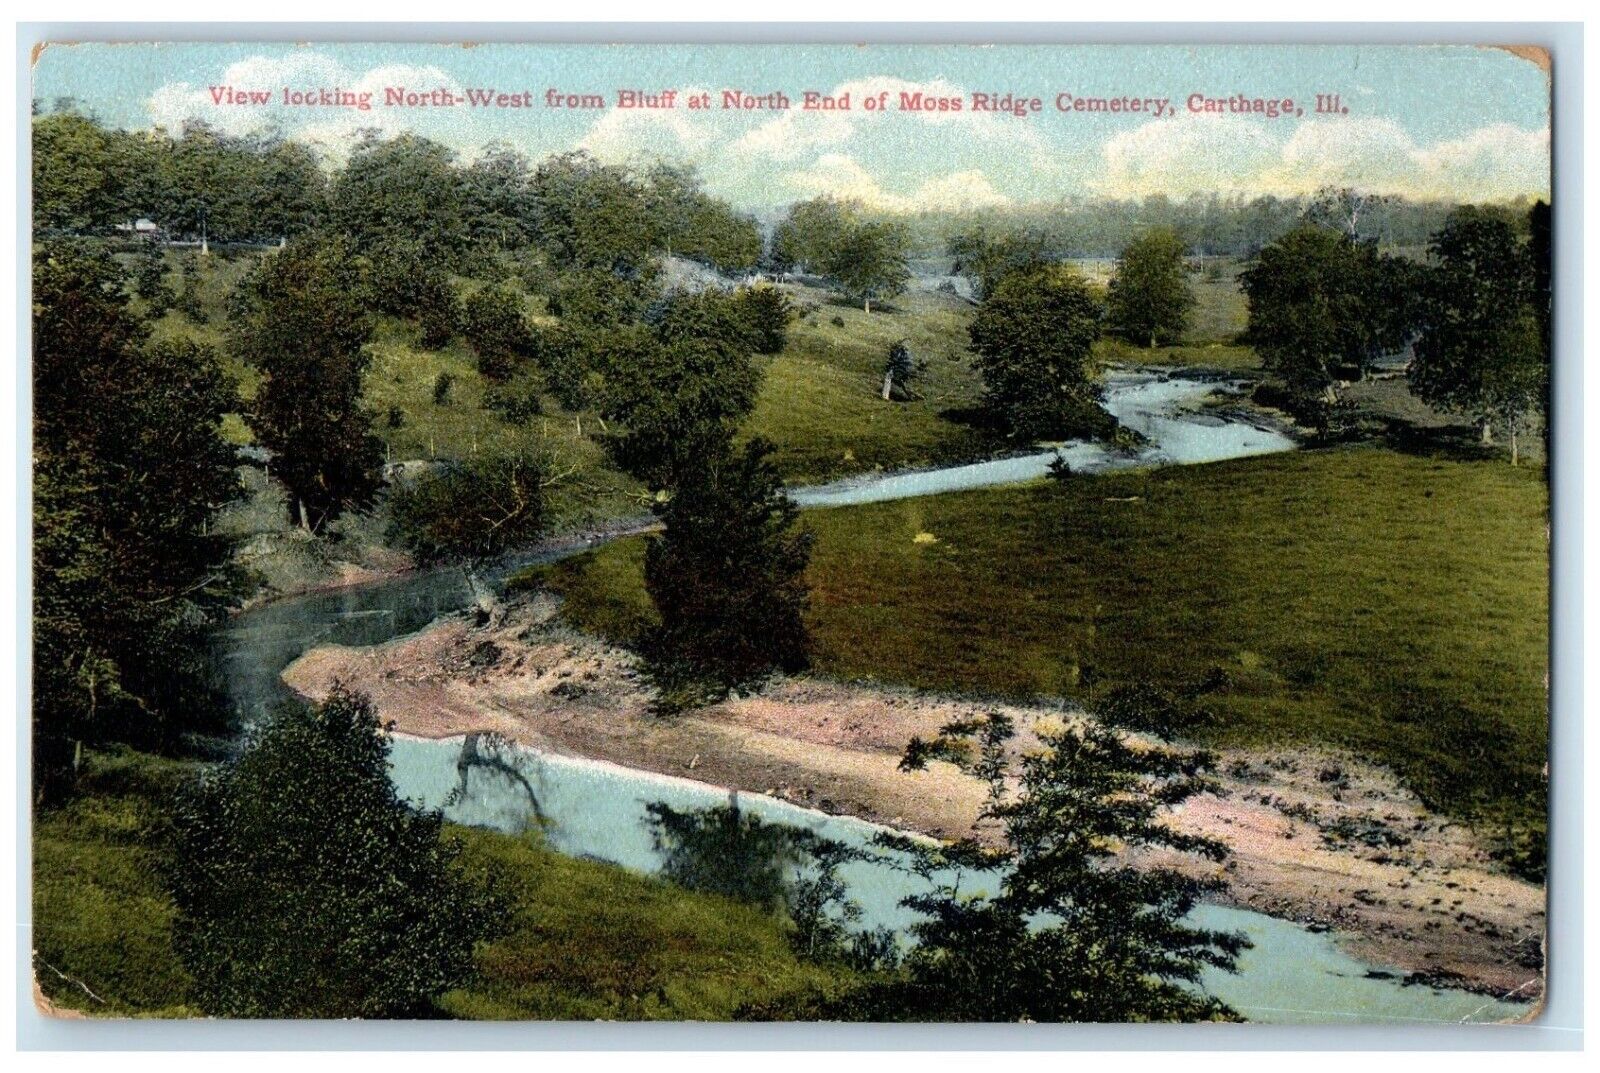 c1910 View Looking North-West Bluff North End Moss Ridge Carthage Ill. Postcard